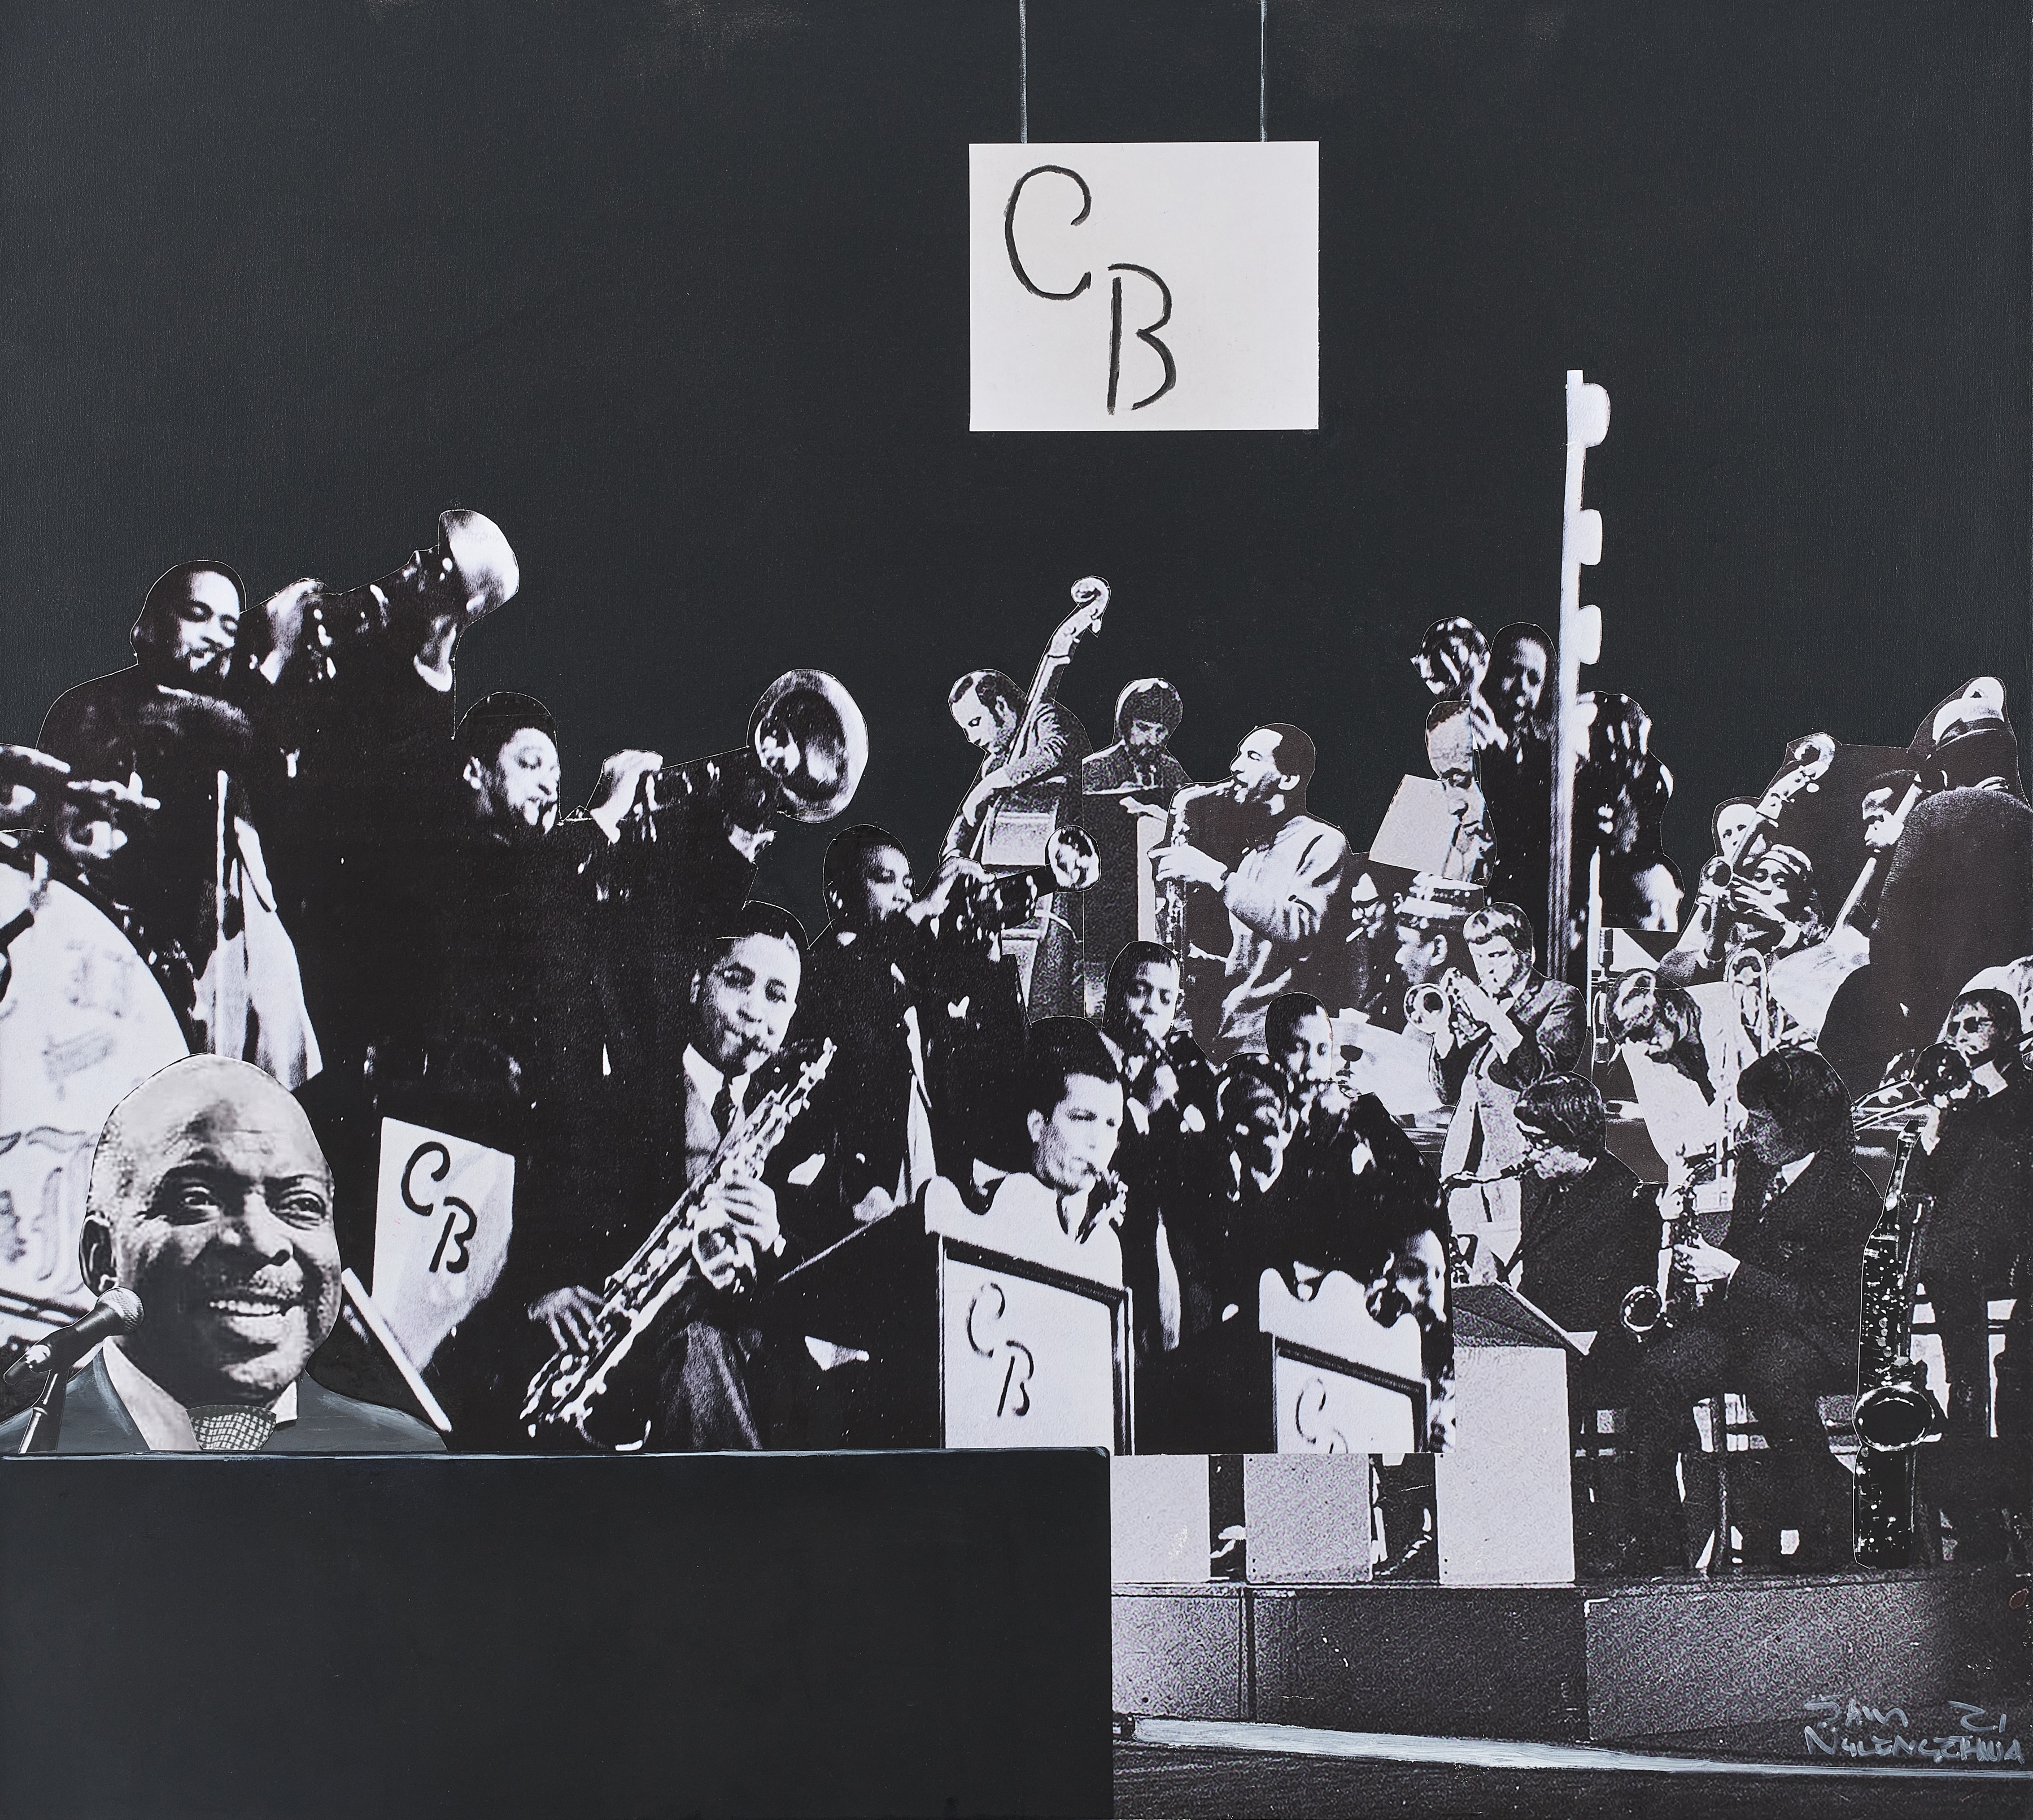 Count Basie&amp;rsquo;s Band, 2021
Mixed media collage on canvas
90.2 x 100.4 x 9.8 cm
Enquire